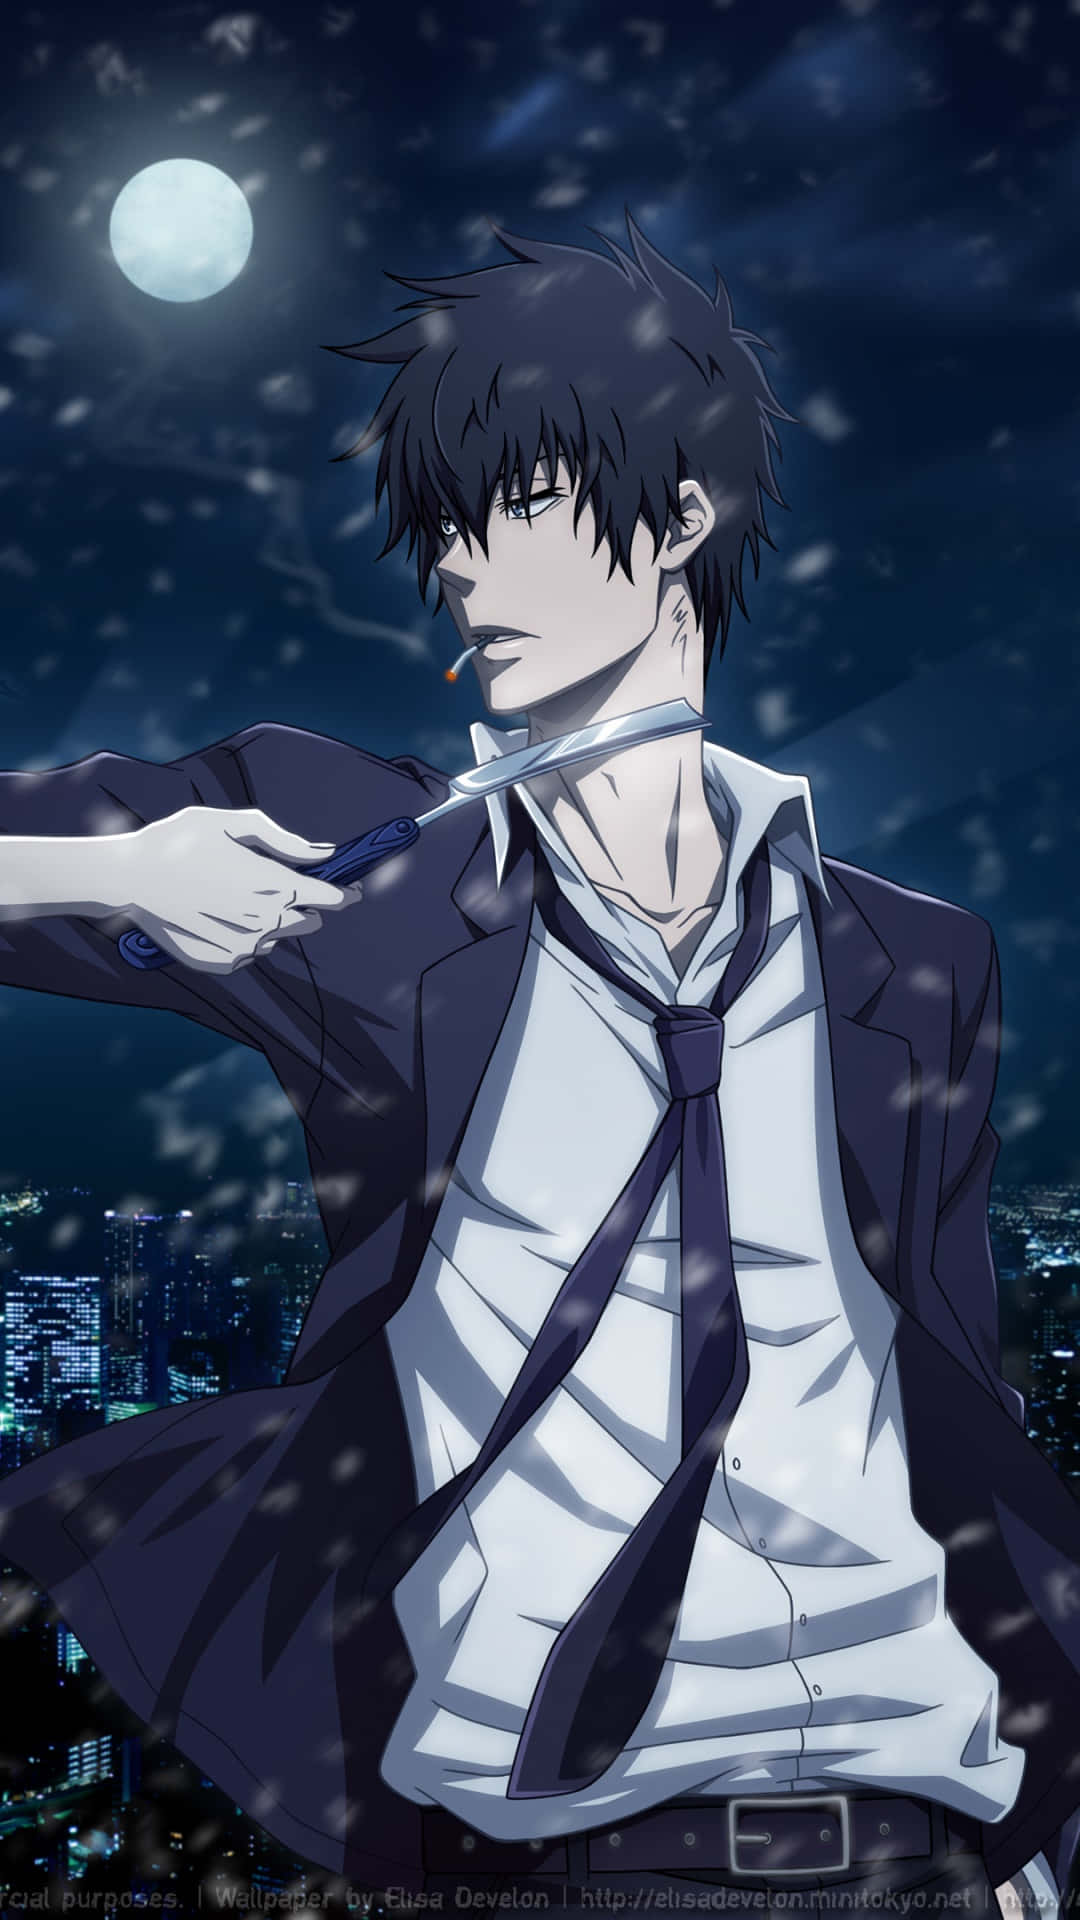 Dive Into The Dystopian, Cyberpunk World Of Psycho Pass.